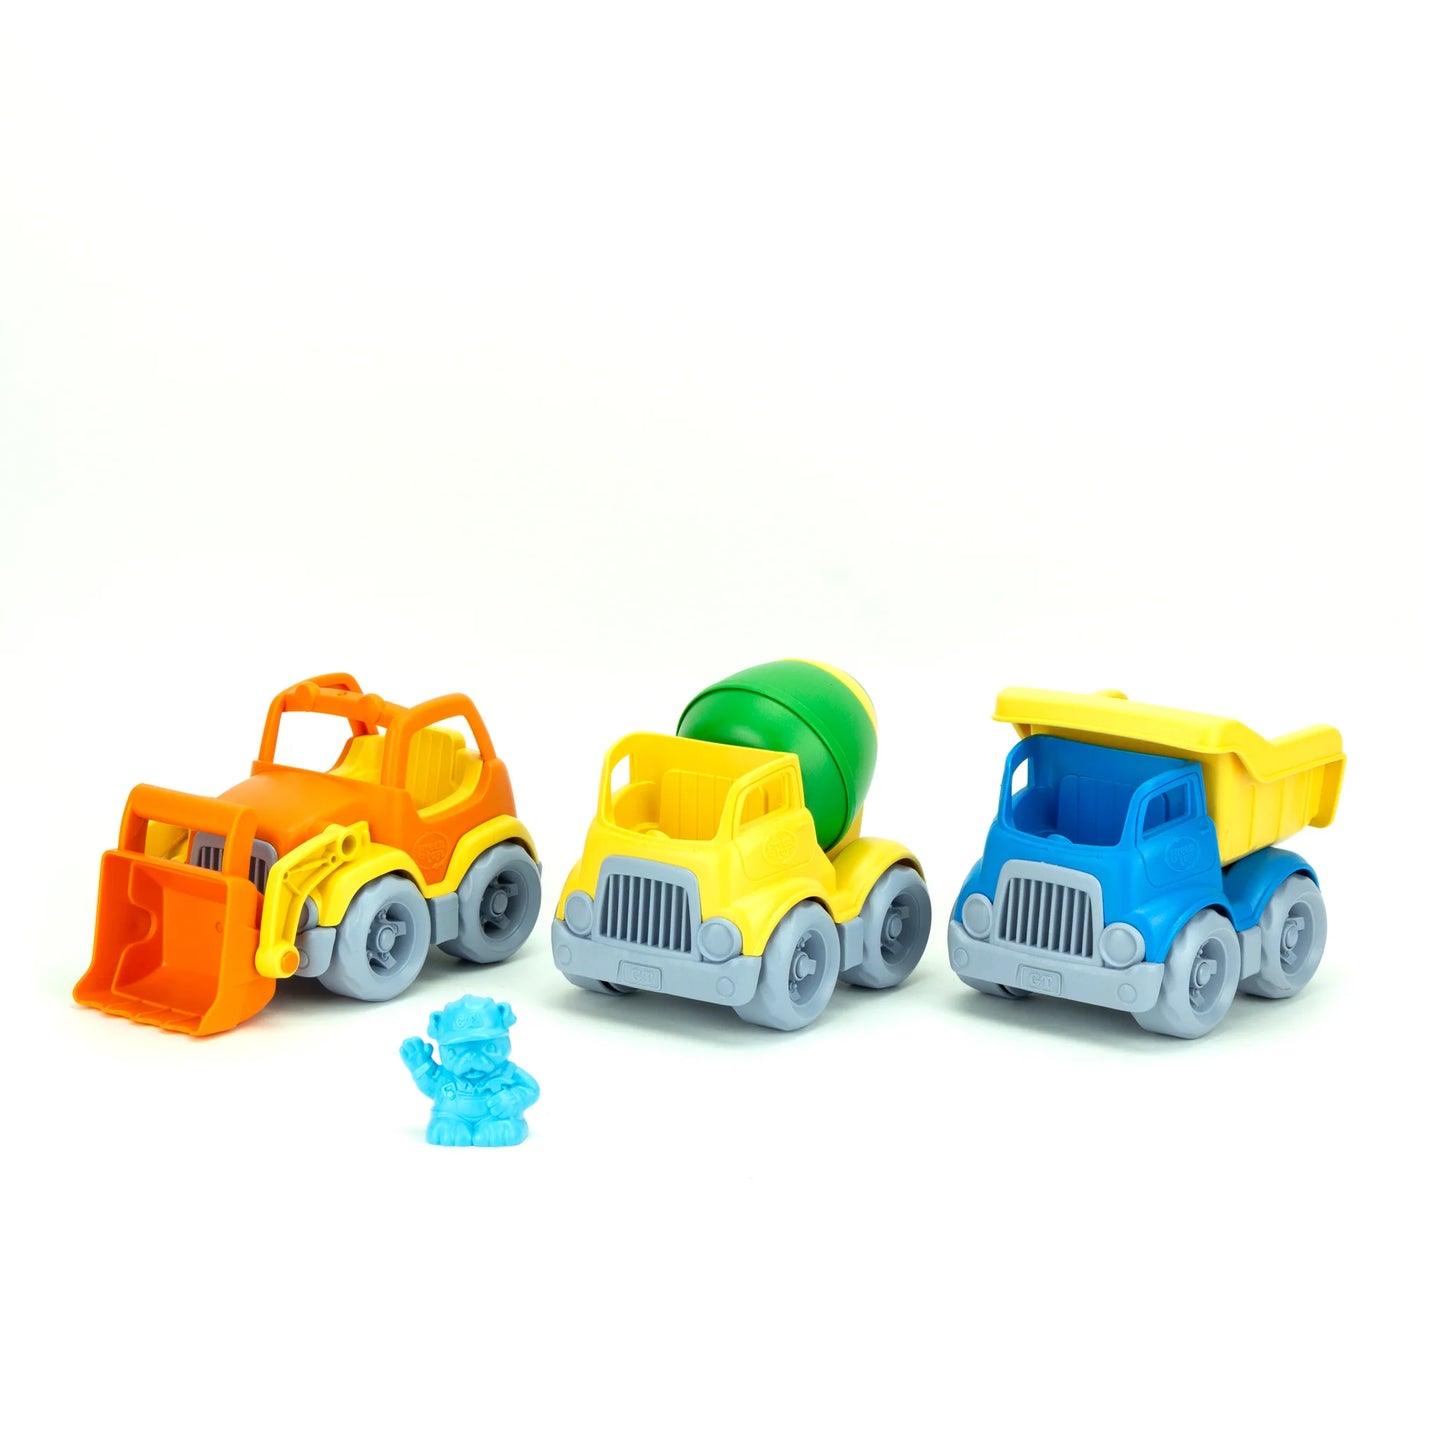 Construction Vehicles by Green Toys